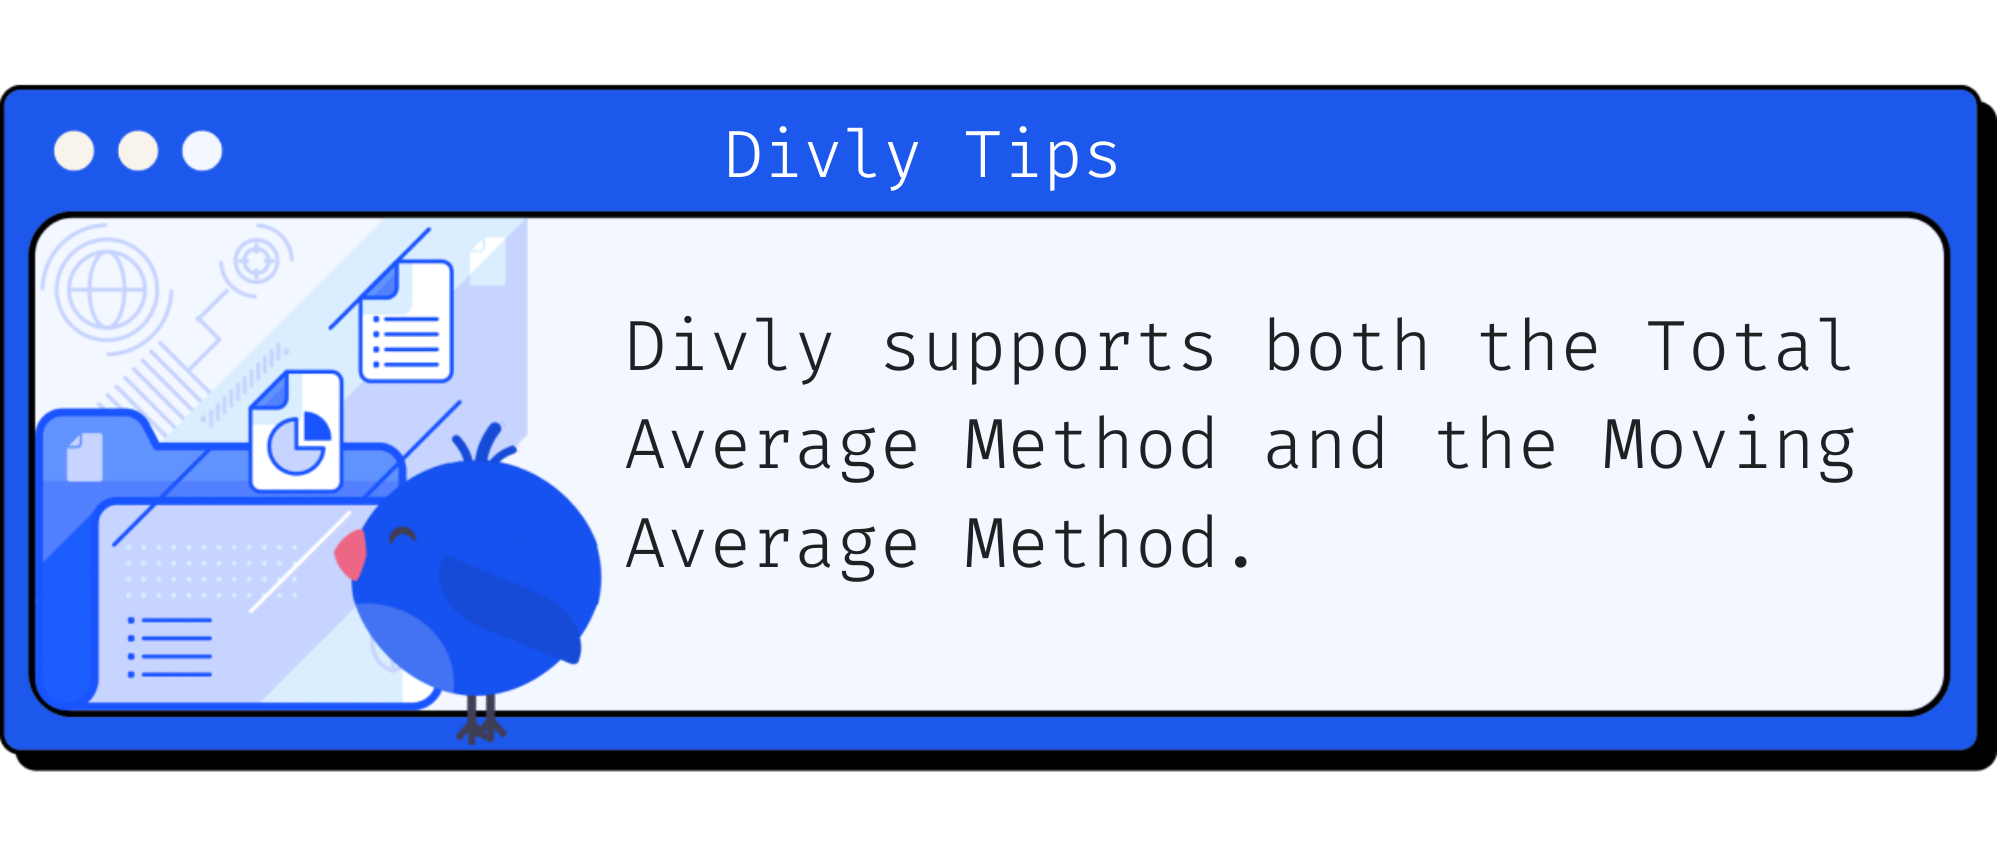 Divly supports both the total average method and the moving average method for cryptocurrency tax